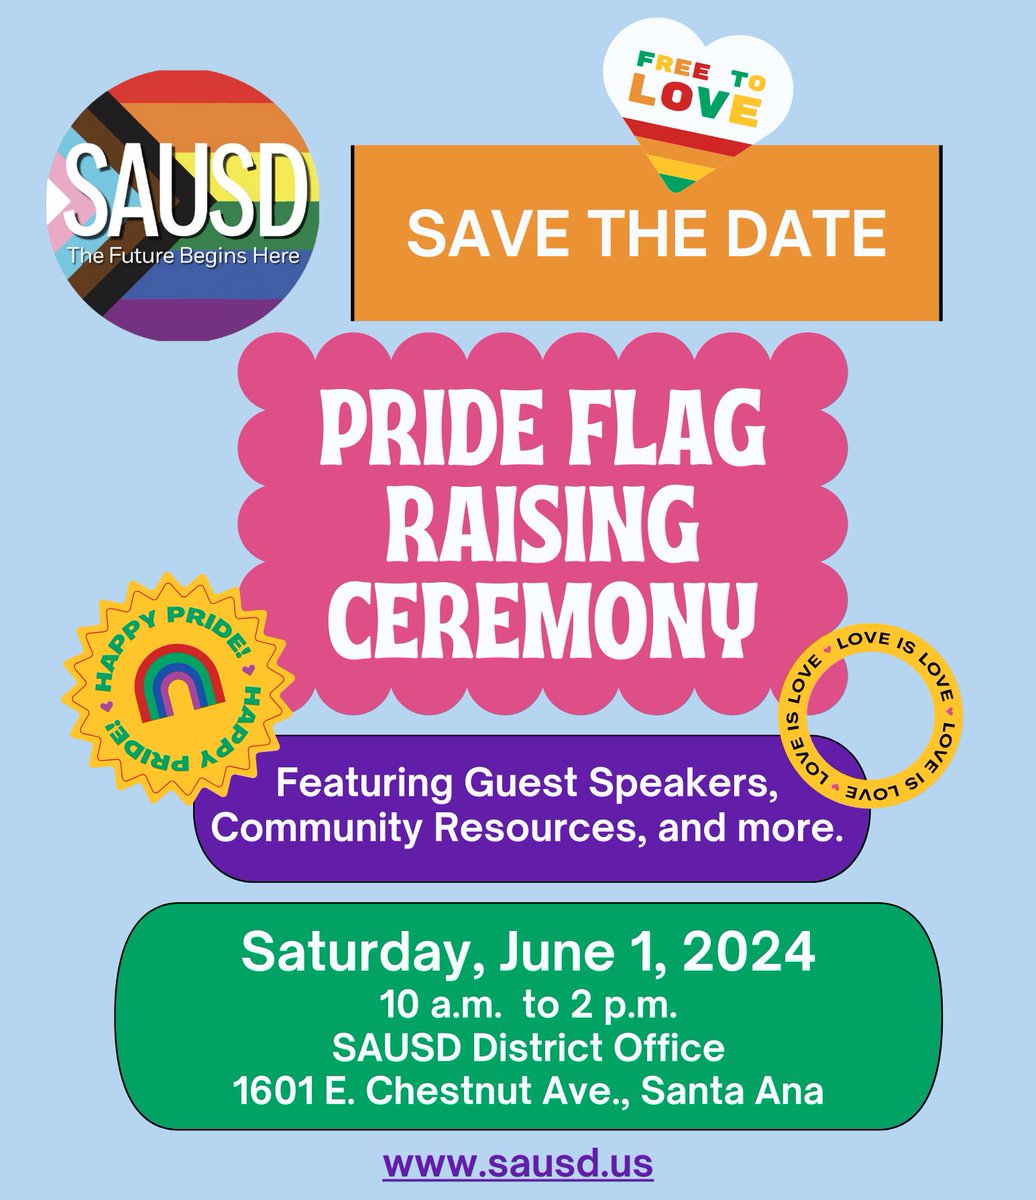 🌈 Save the Date! 🌈#SAUSD is thrilled to host a Pride Flag raising ceremony on June 1 from 10 a.m. to 2 p.m. at the District Office. Join us as we celebrate equity, inclusivity and diversity. Stay tuned for more details💚💛🧡❤️🩷💜